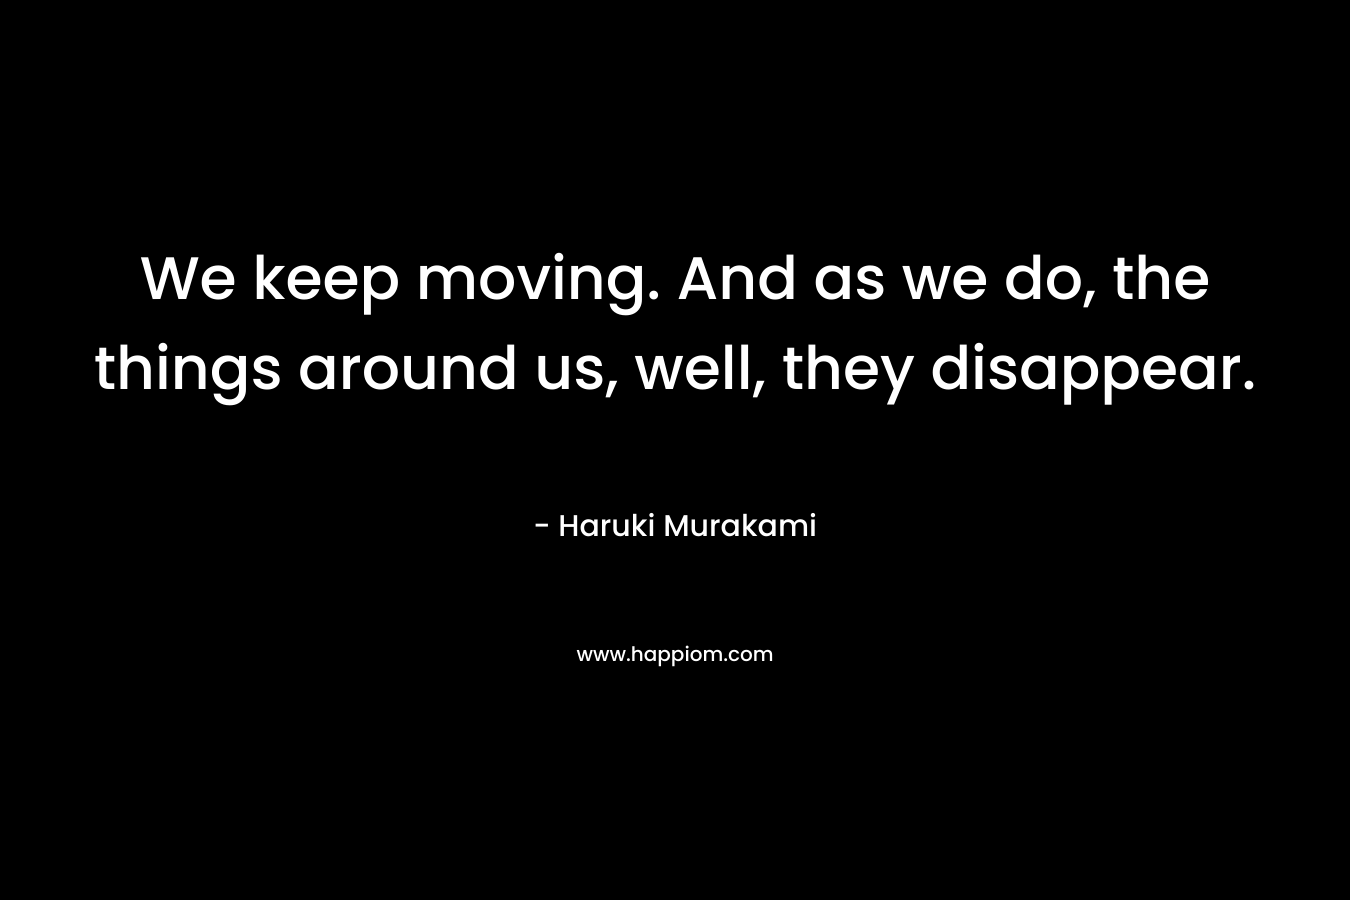 We keep moving. And as we do, the things around us, well, they disappear.